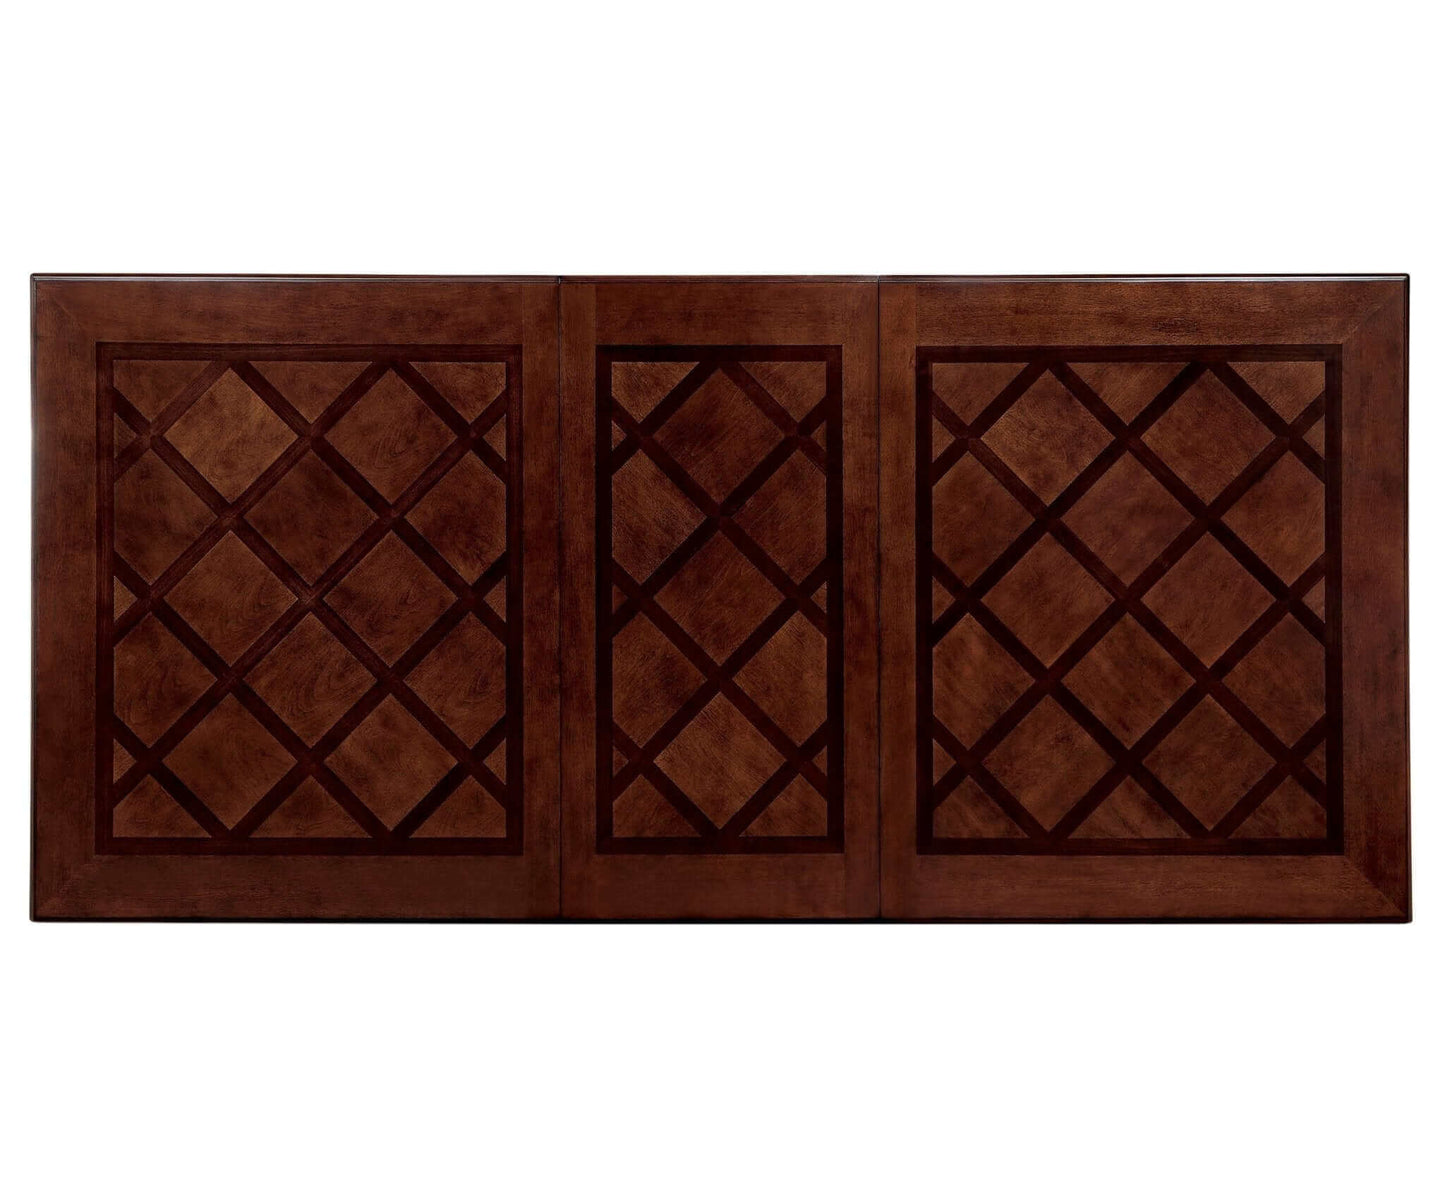 Brown cherry finish traditional style dining table top with elegant grid pattern.